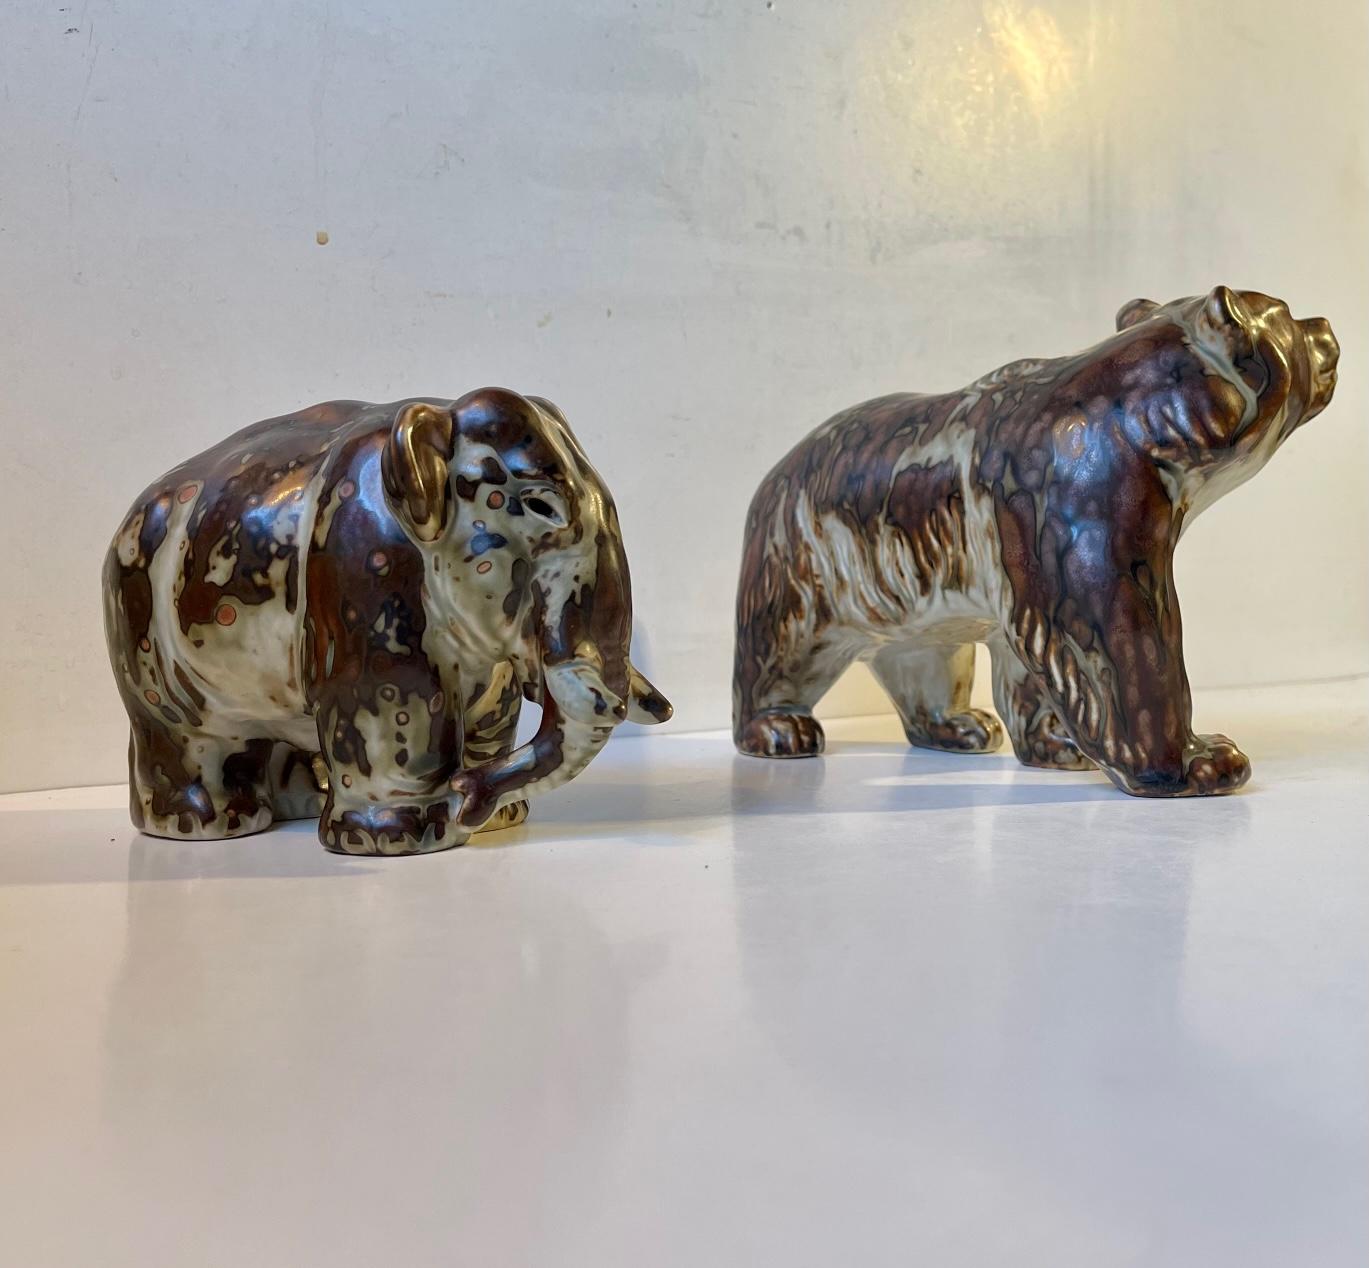 This series of elephants / mammoths, bears, deers etc was designed by the Danish ceramist Knud Kyhn (KK) all the way back in 1929-36. Hugely inspired by the sung glazes applied in Axel Salto's and Bode Willumsen's designs these naturalistic